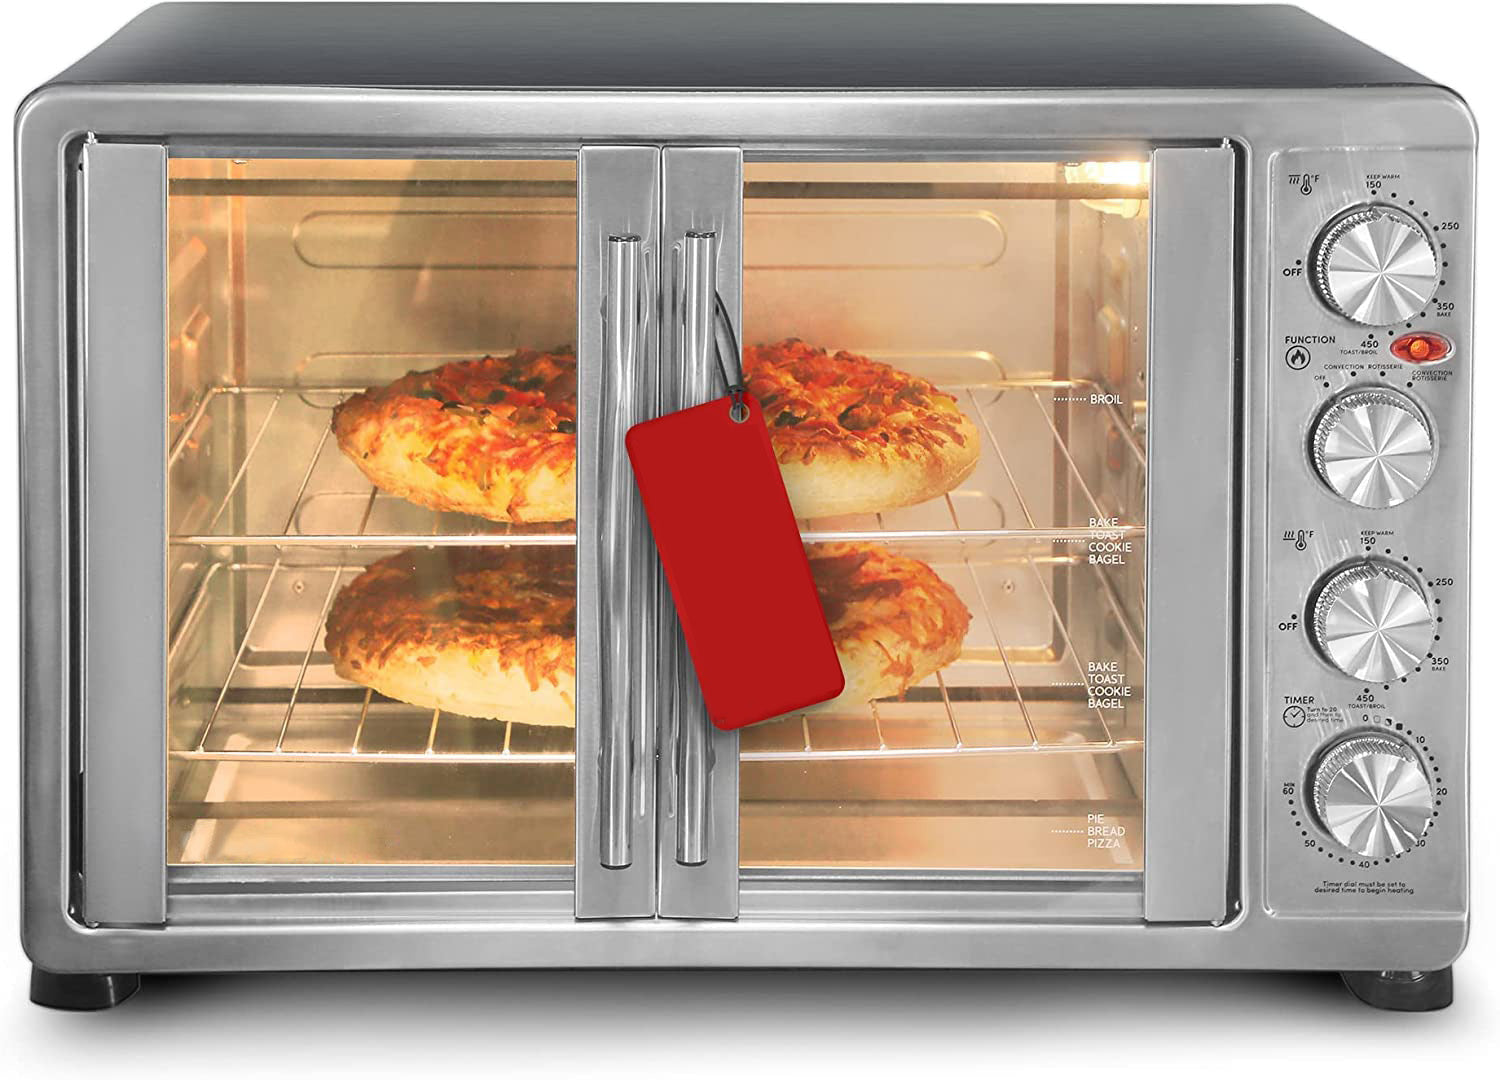 18-Slice Convection Oven with 4-Control Knobs, Bake Broil Toast Rotisserie Keep Warm